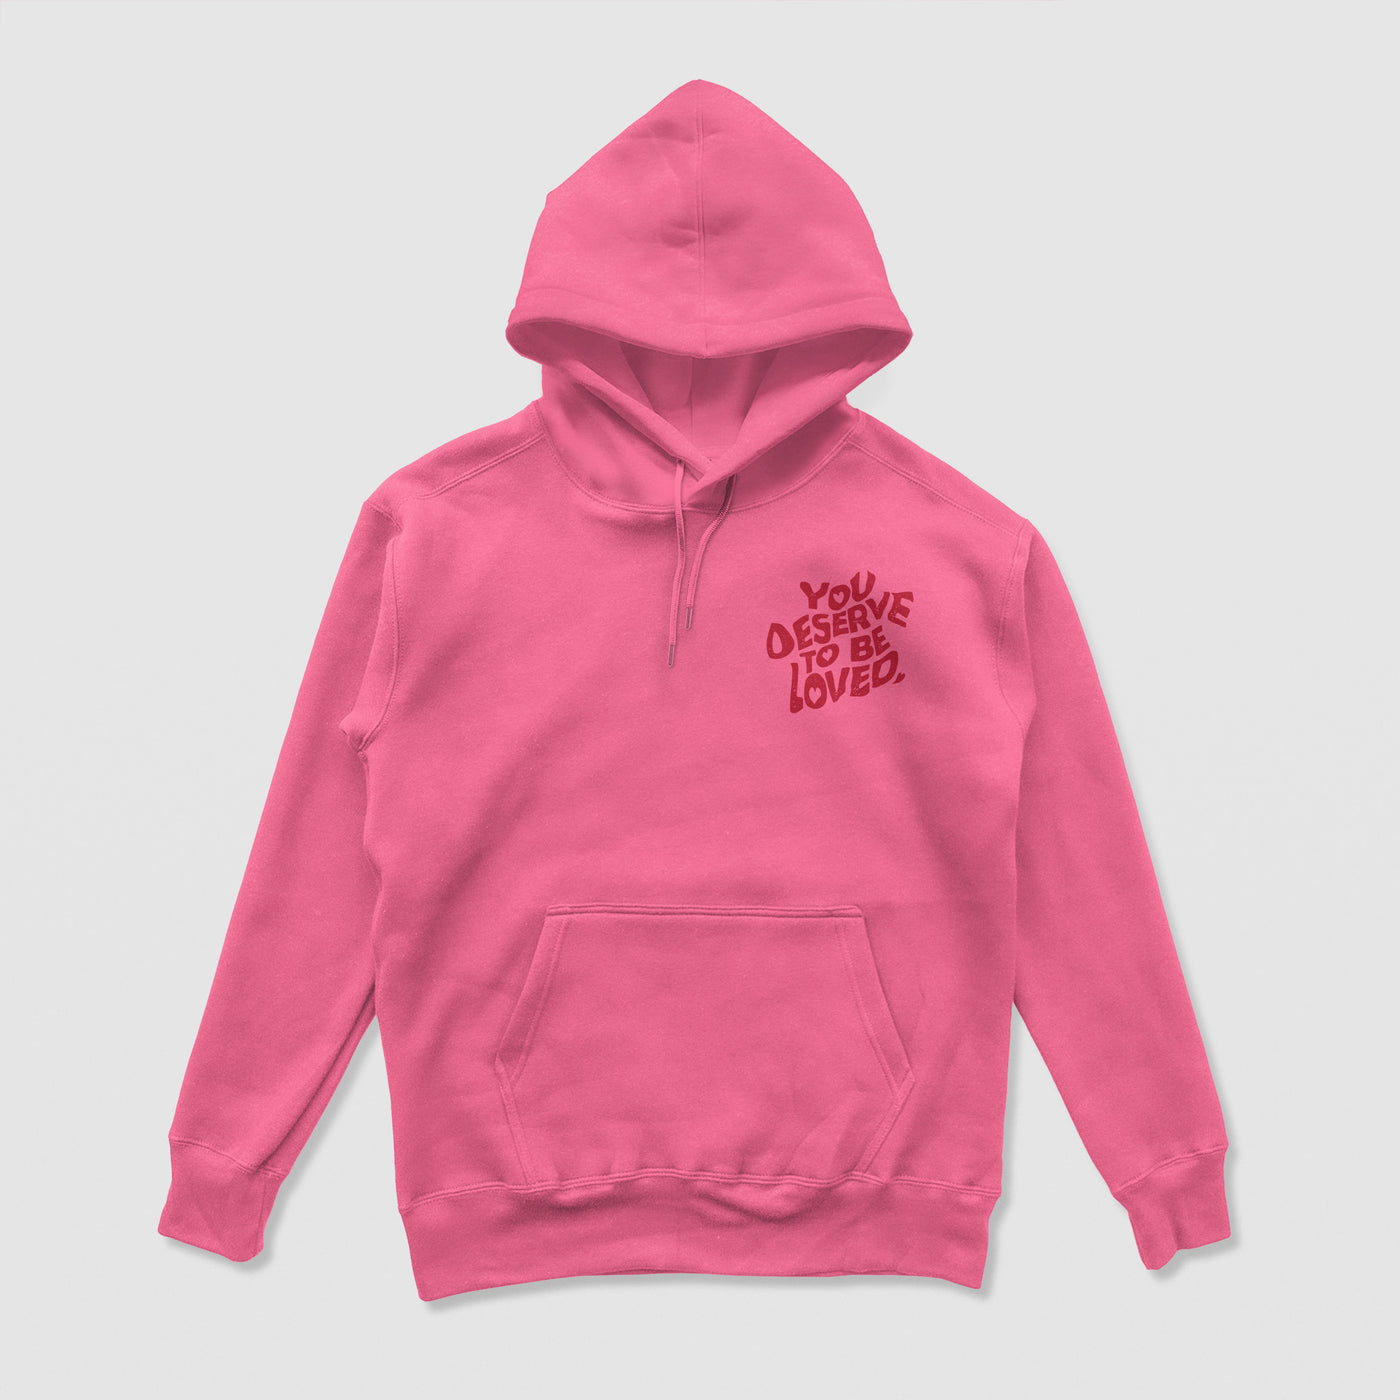 You Deserve To Be Loved Valentines Hoodie

Thank you for existing. You're worth far more than you could imagine. Believe in yourself and the imprint you're leaving on this world and those around you. You deDREAM Clothing 